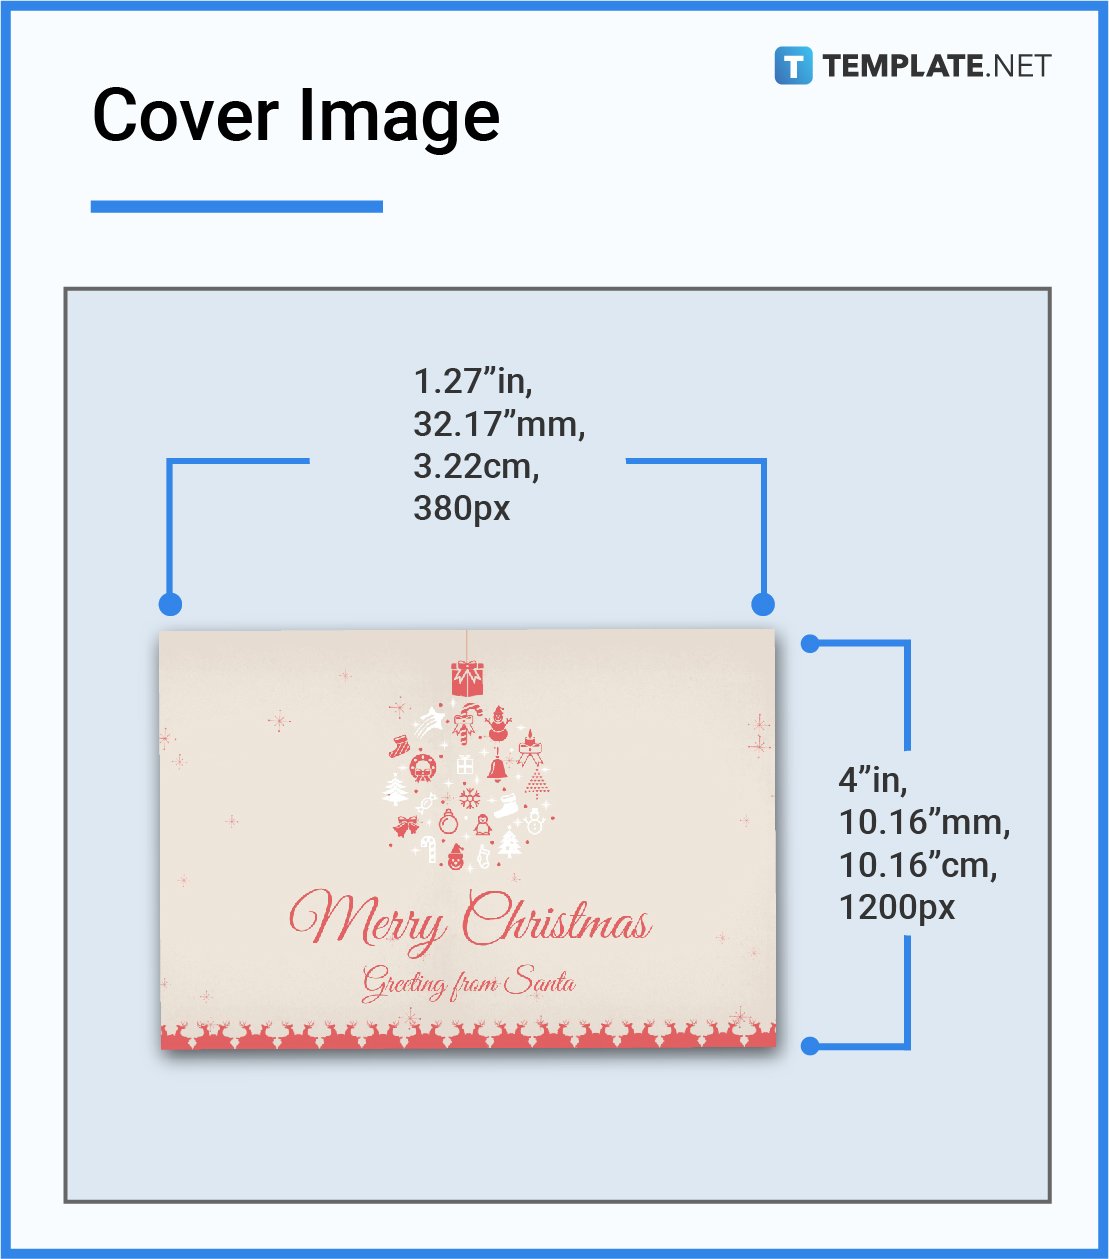 greeting card sizes in inches